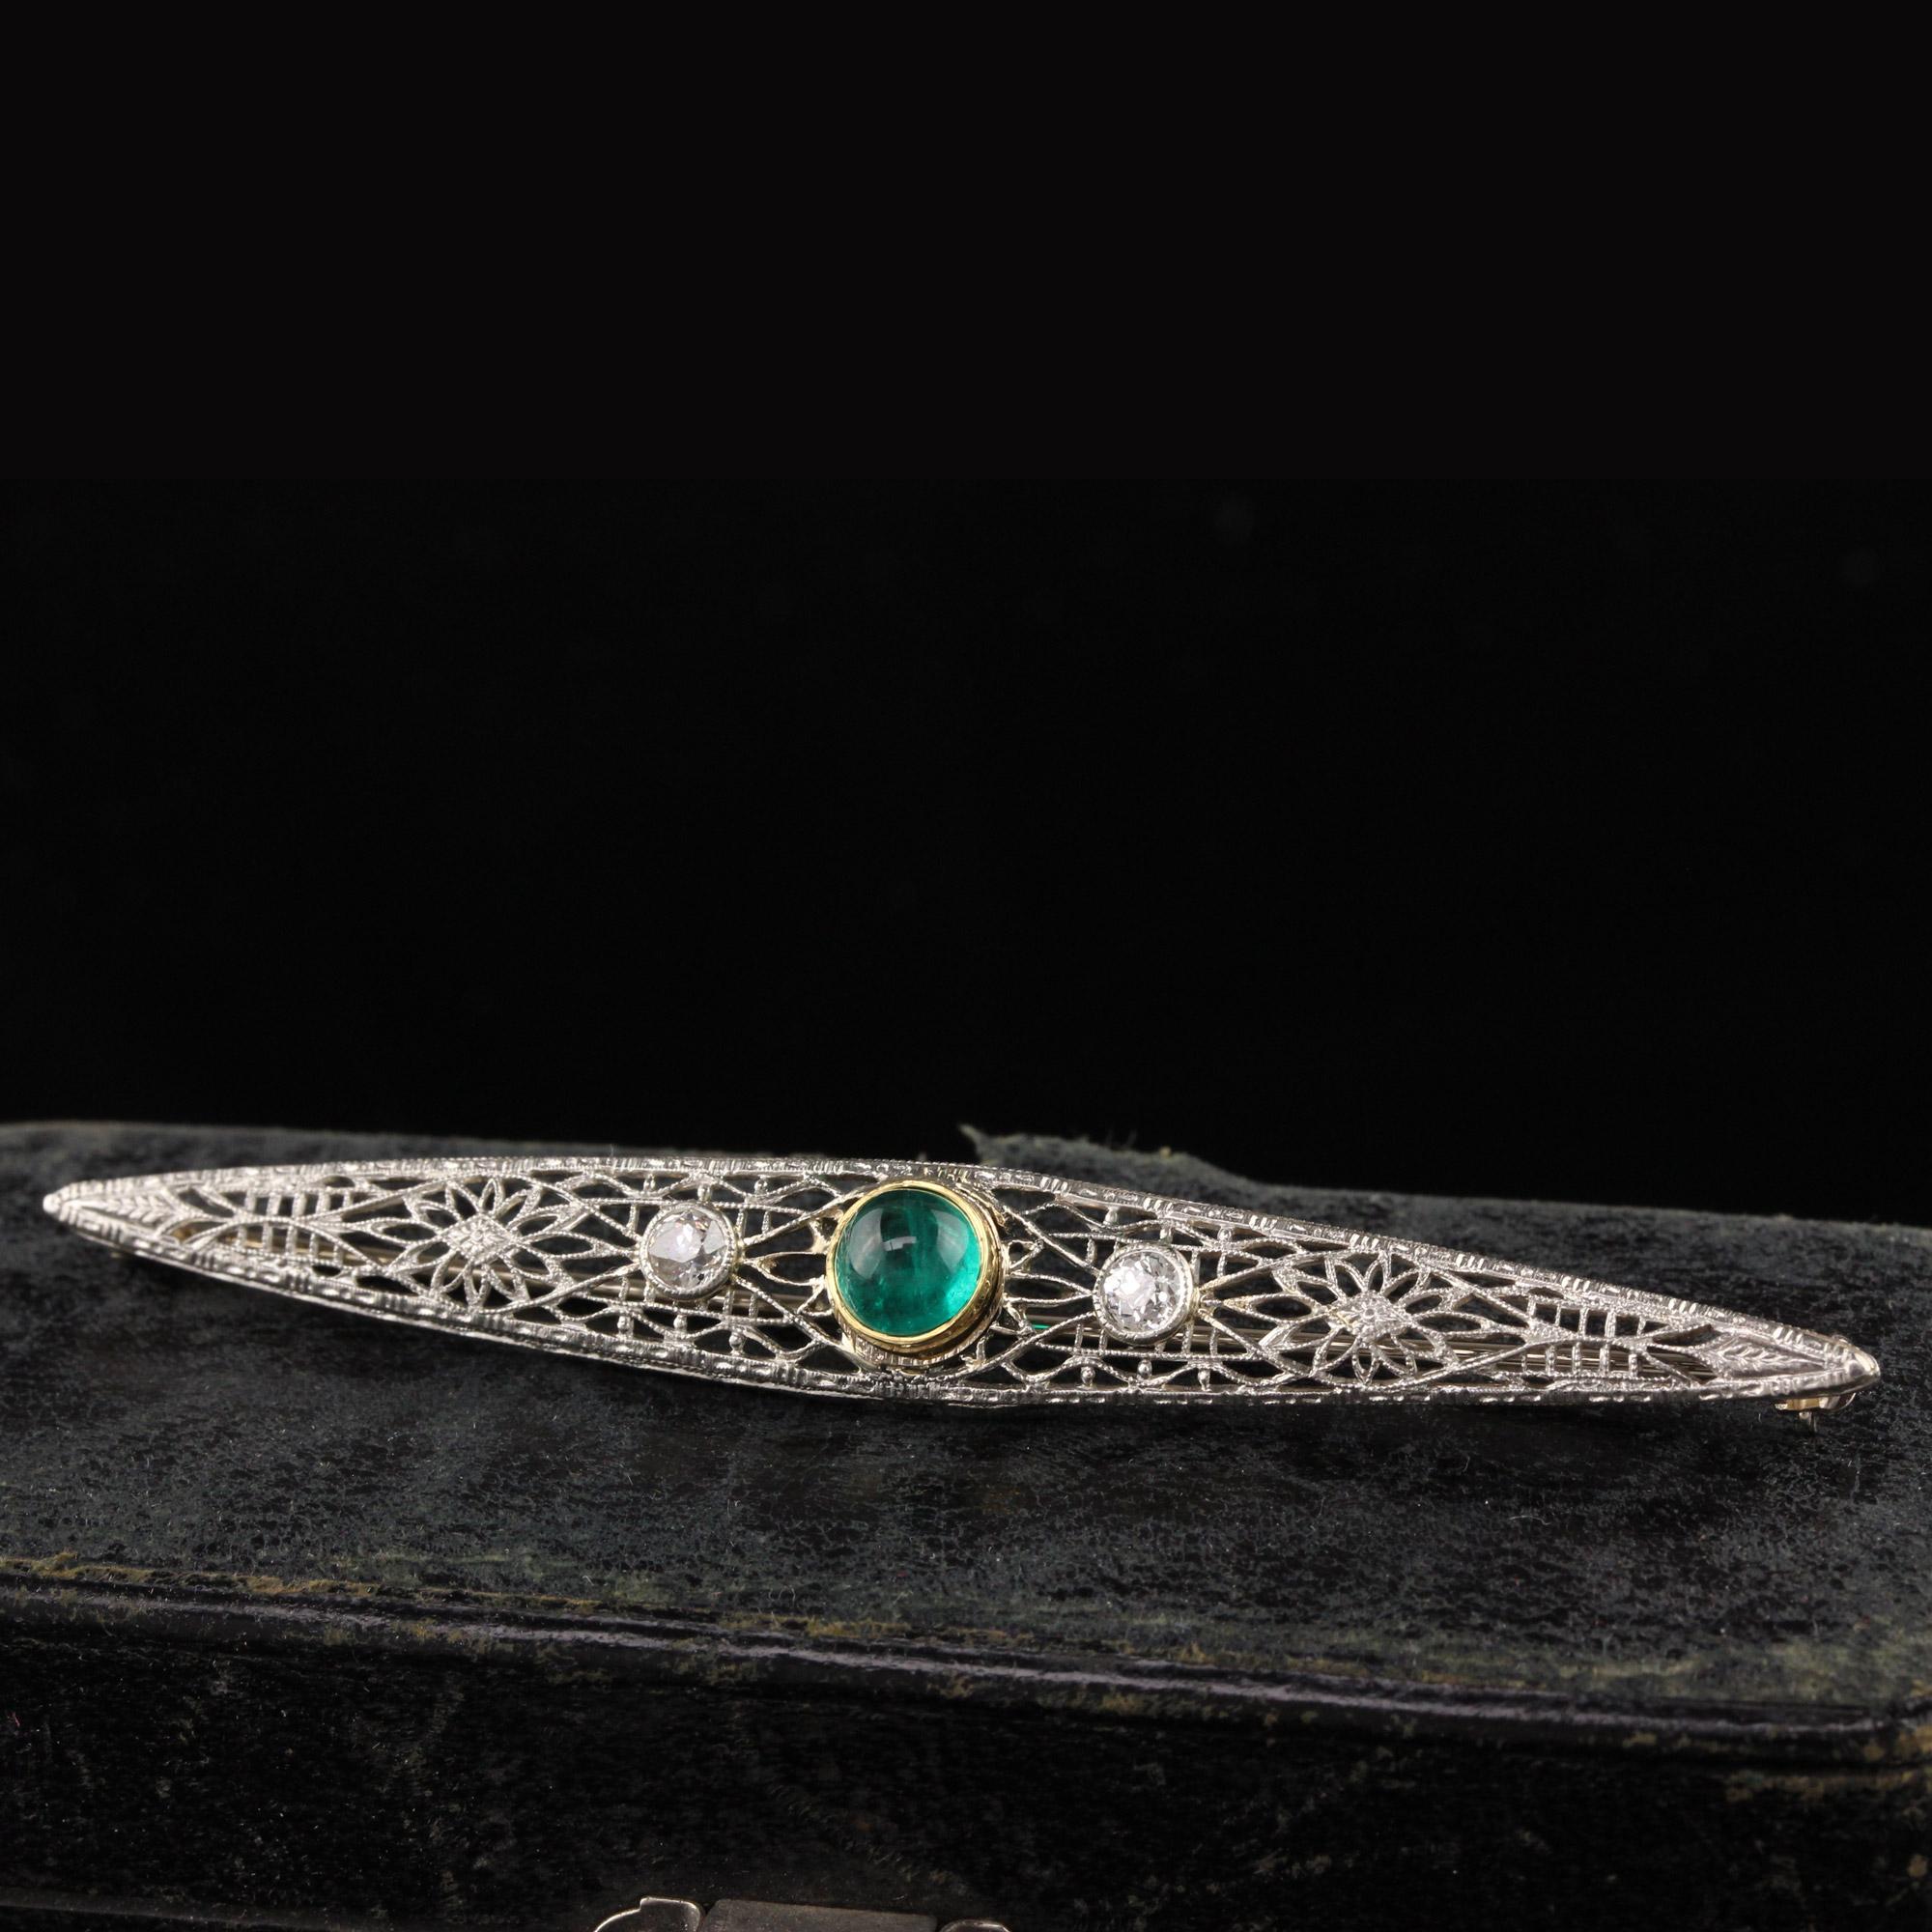 Antique Art Deco 14K White Gold Old Euro Diamond Emerald Filigree Pin In Good Condition For Sale In Great Neck, NY